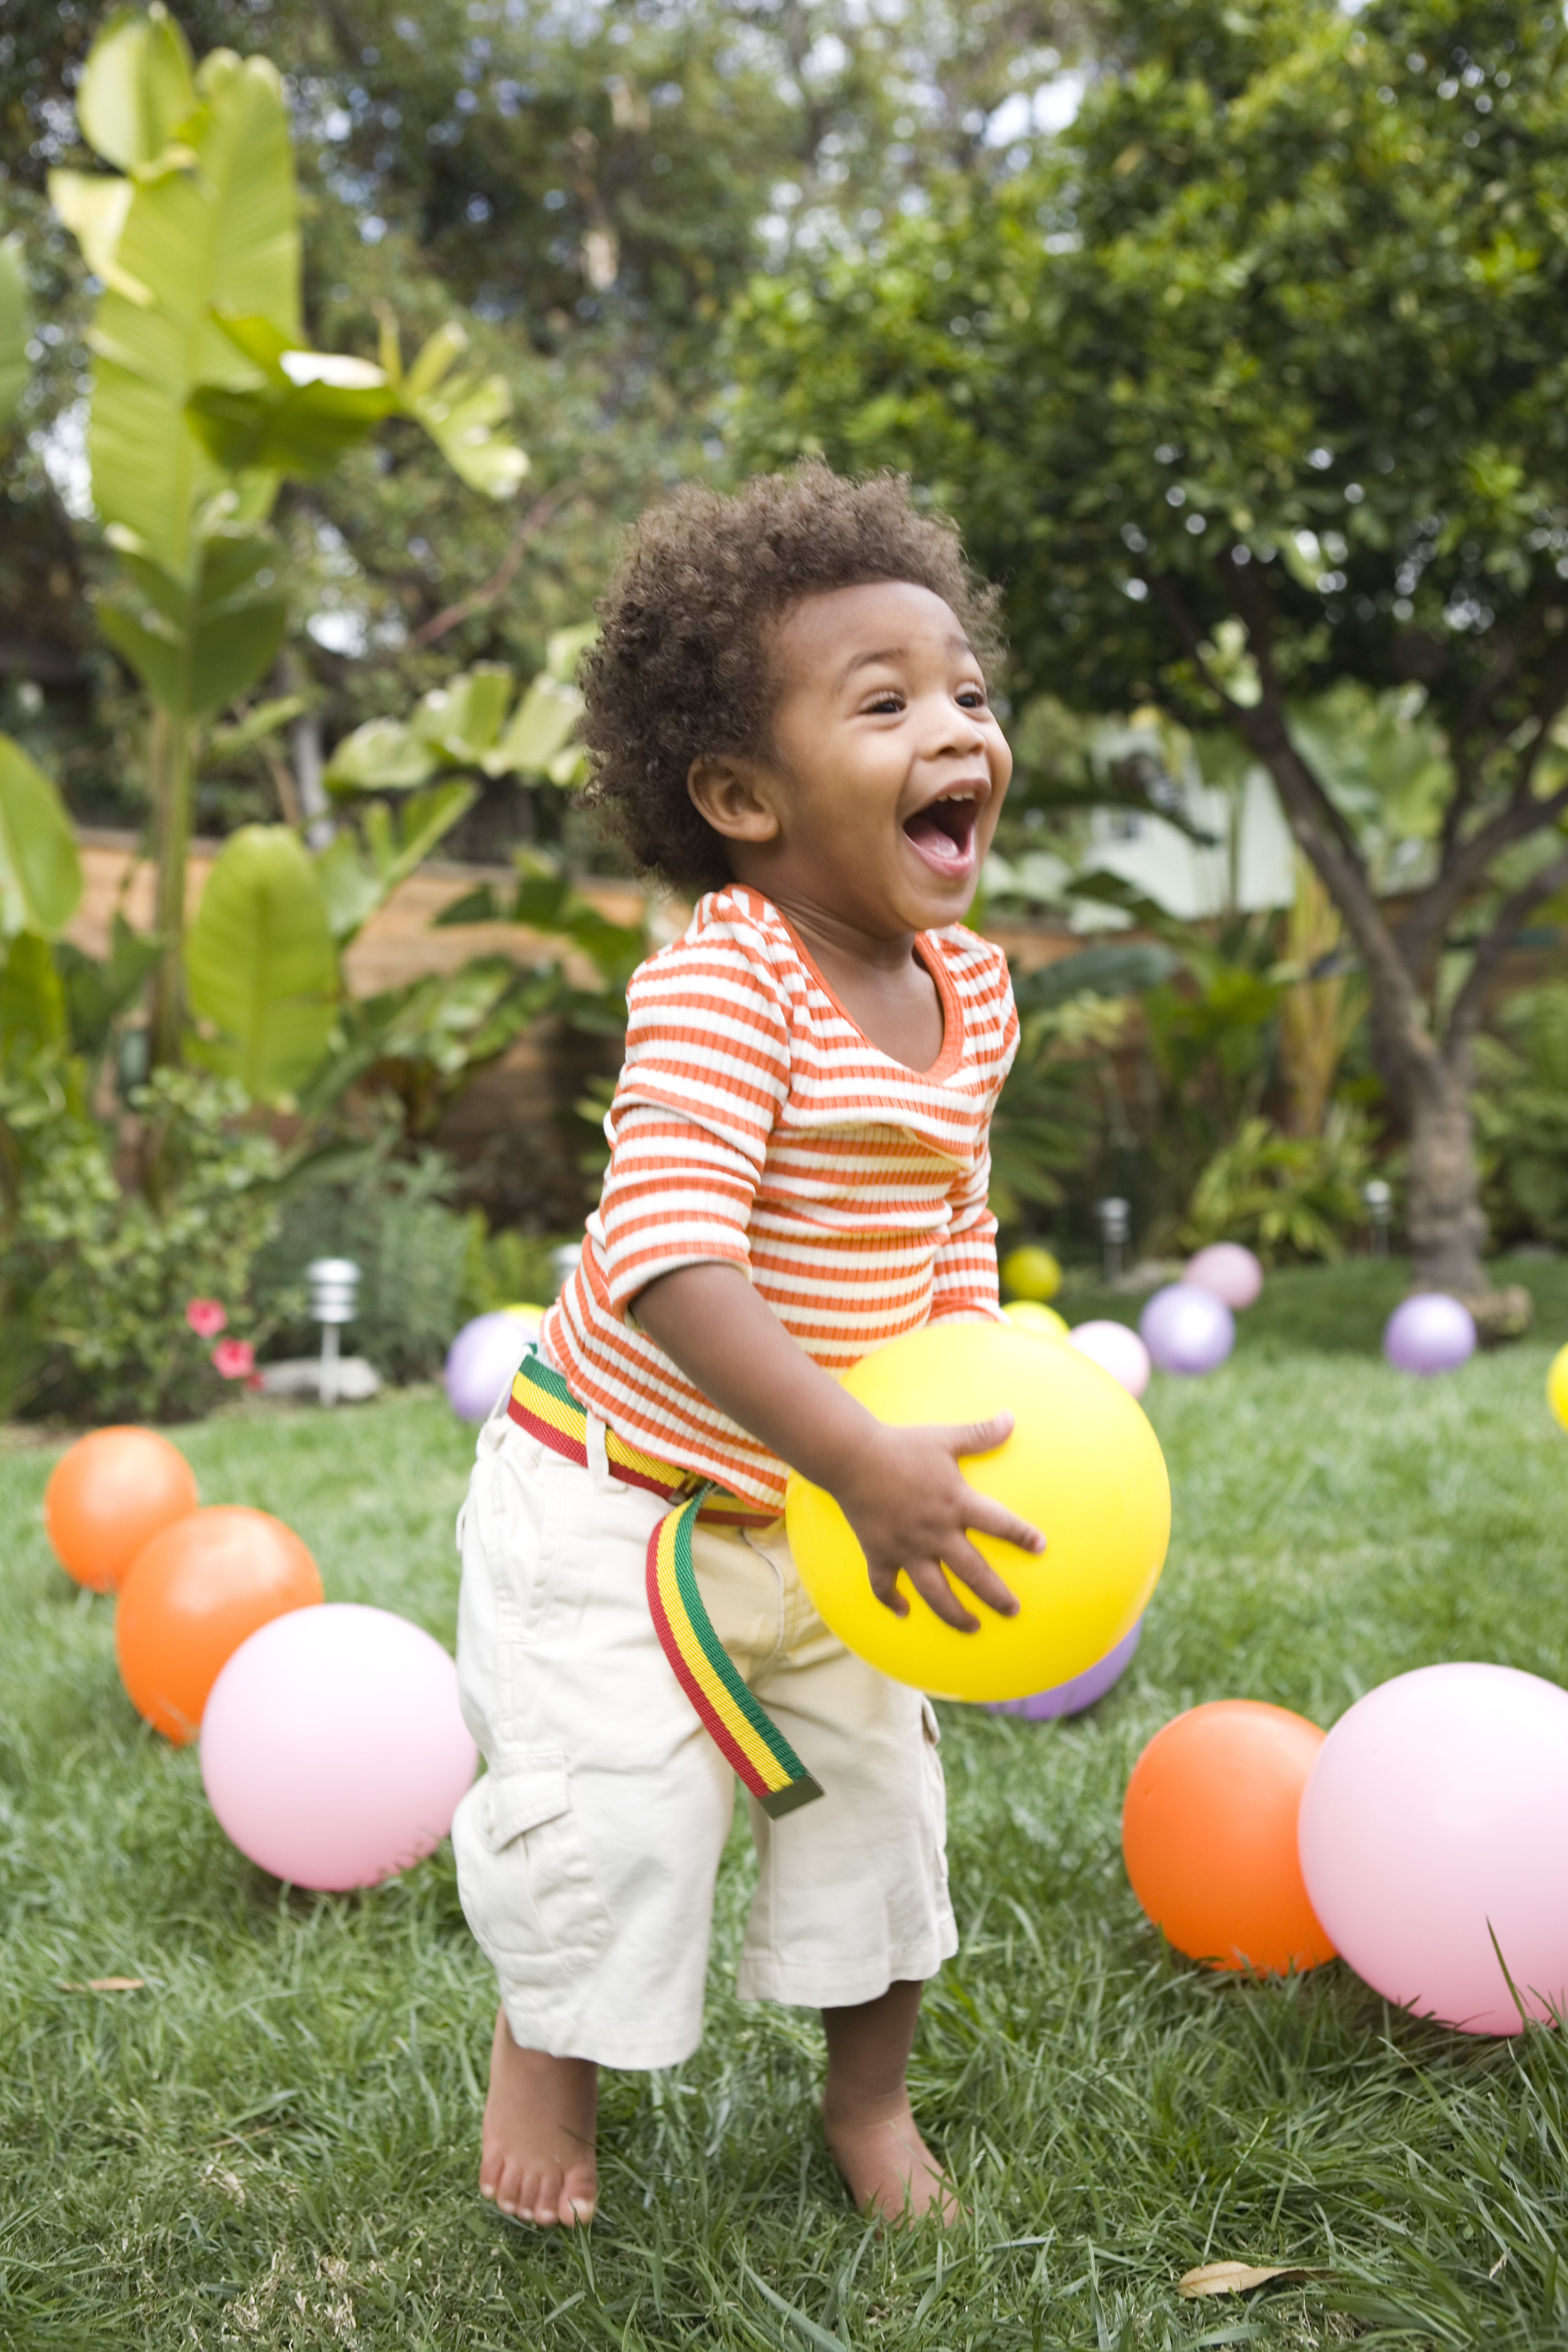 a baby playing with balloons in the grass